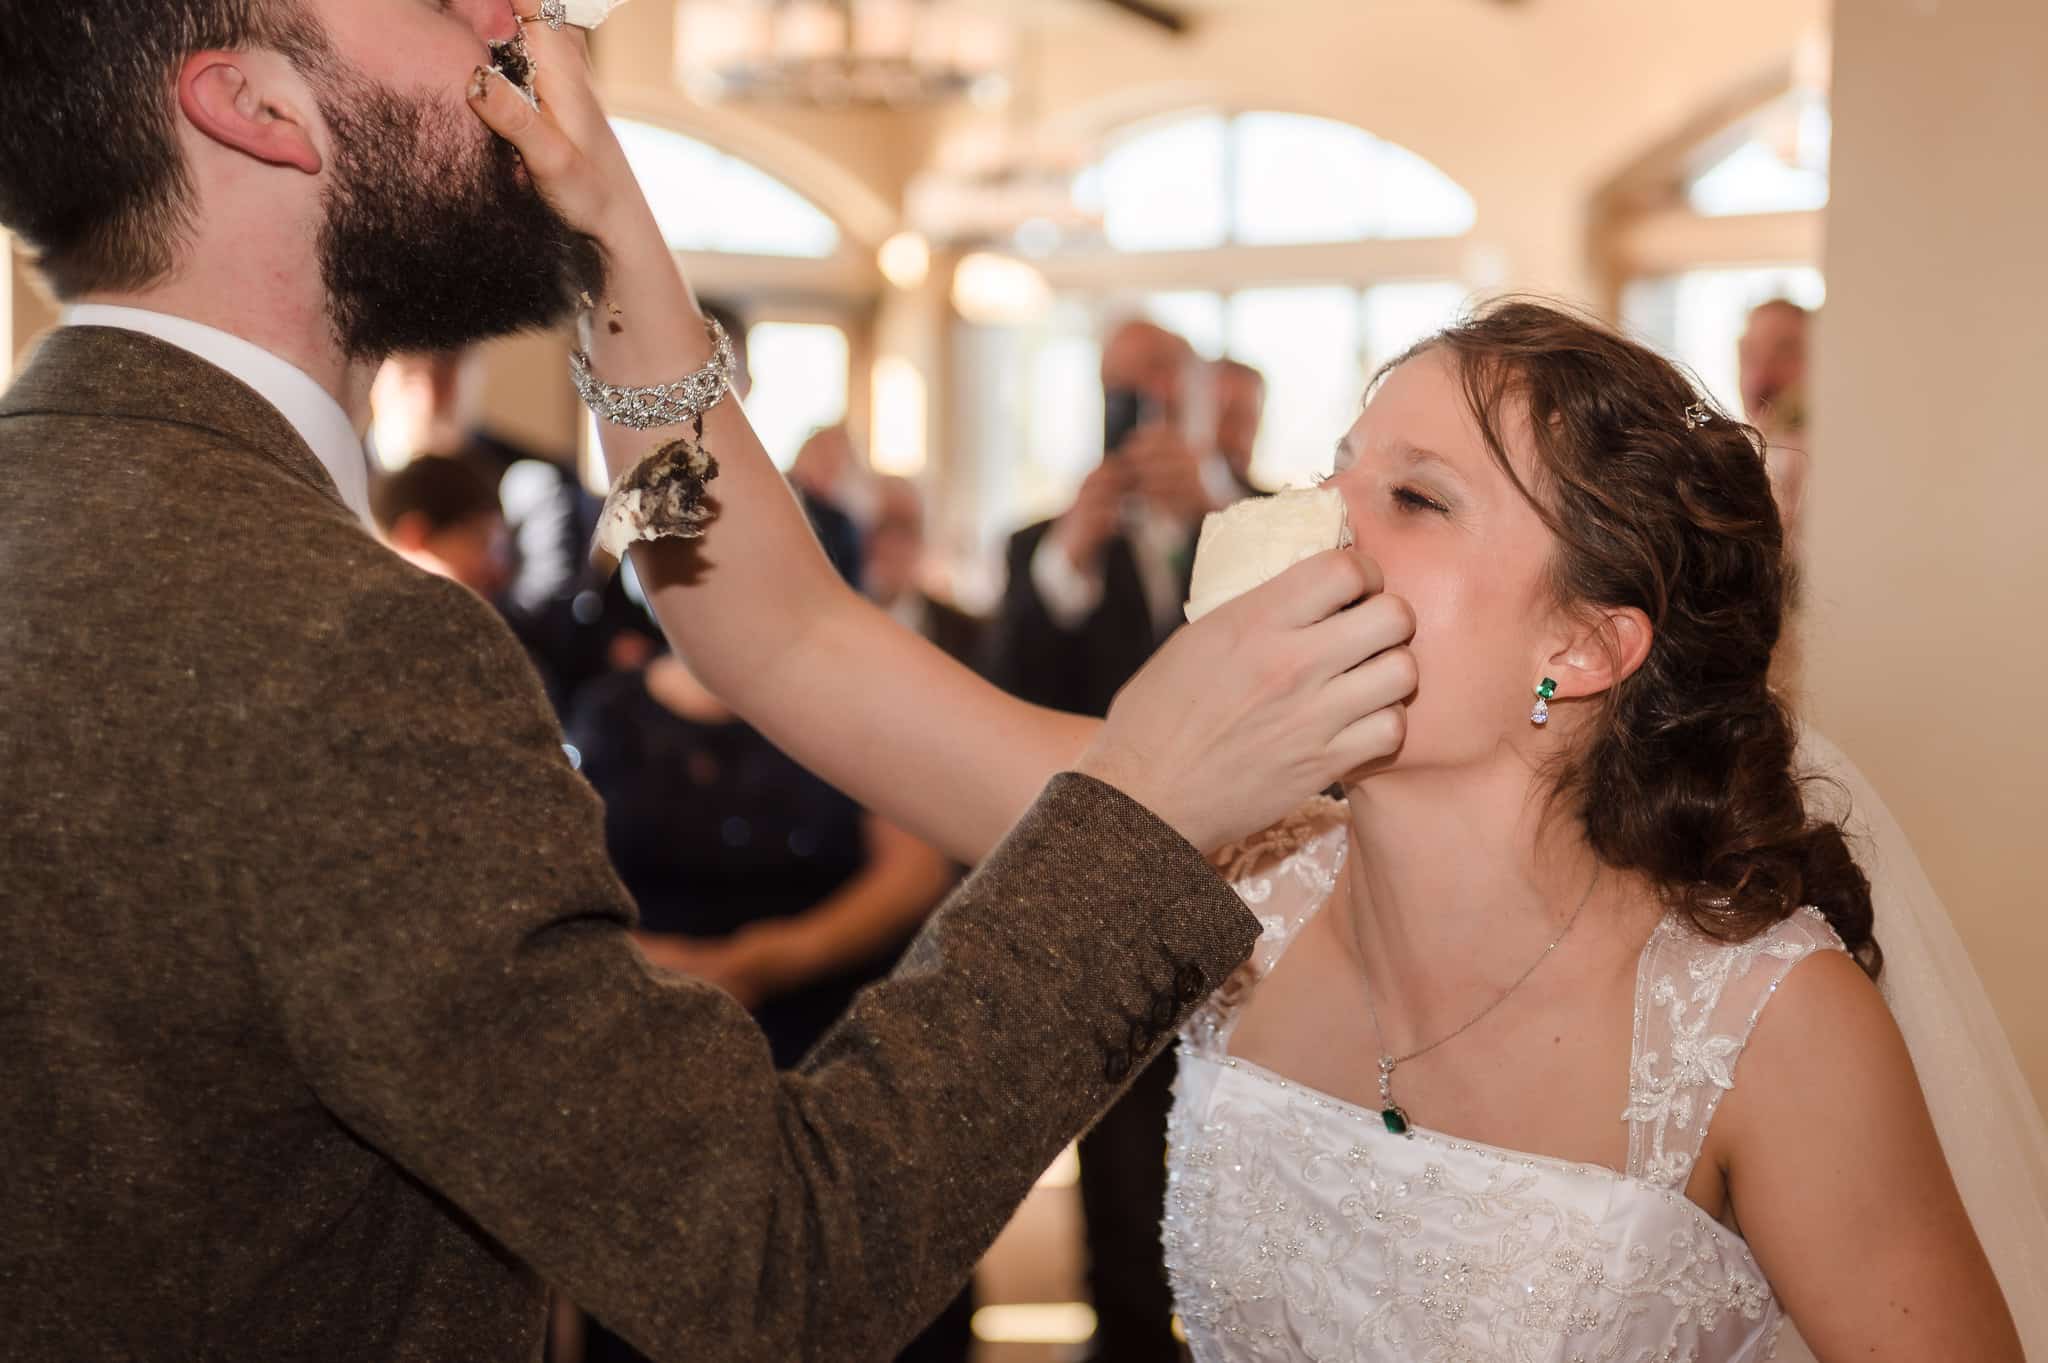 The bride and groom feed each other cake and in the process smash the pieces into each others faces.